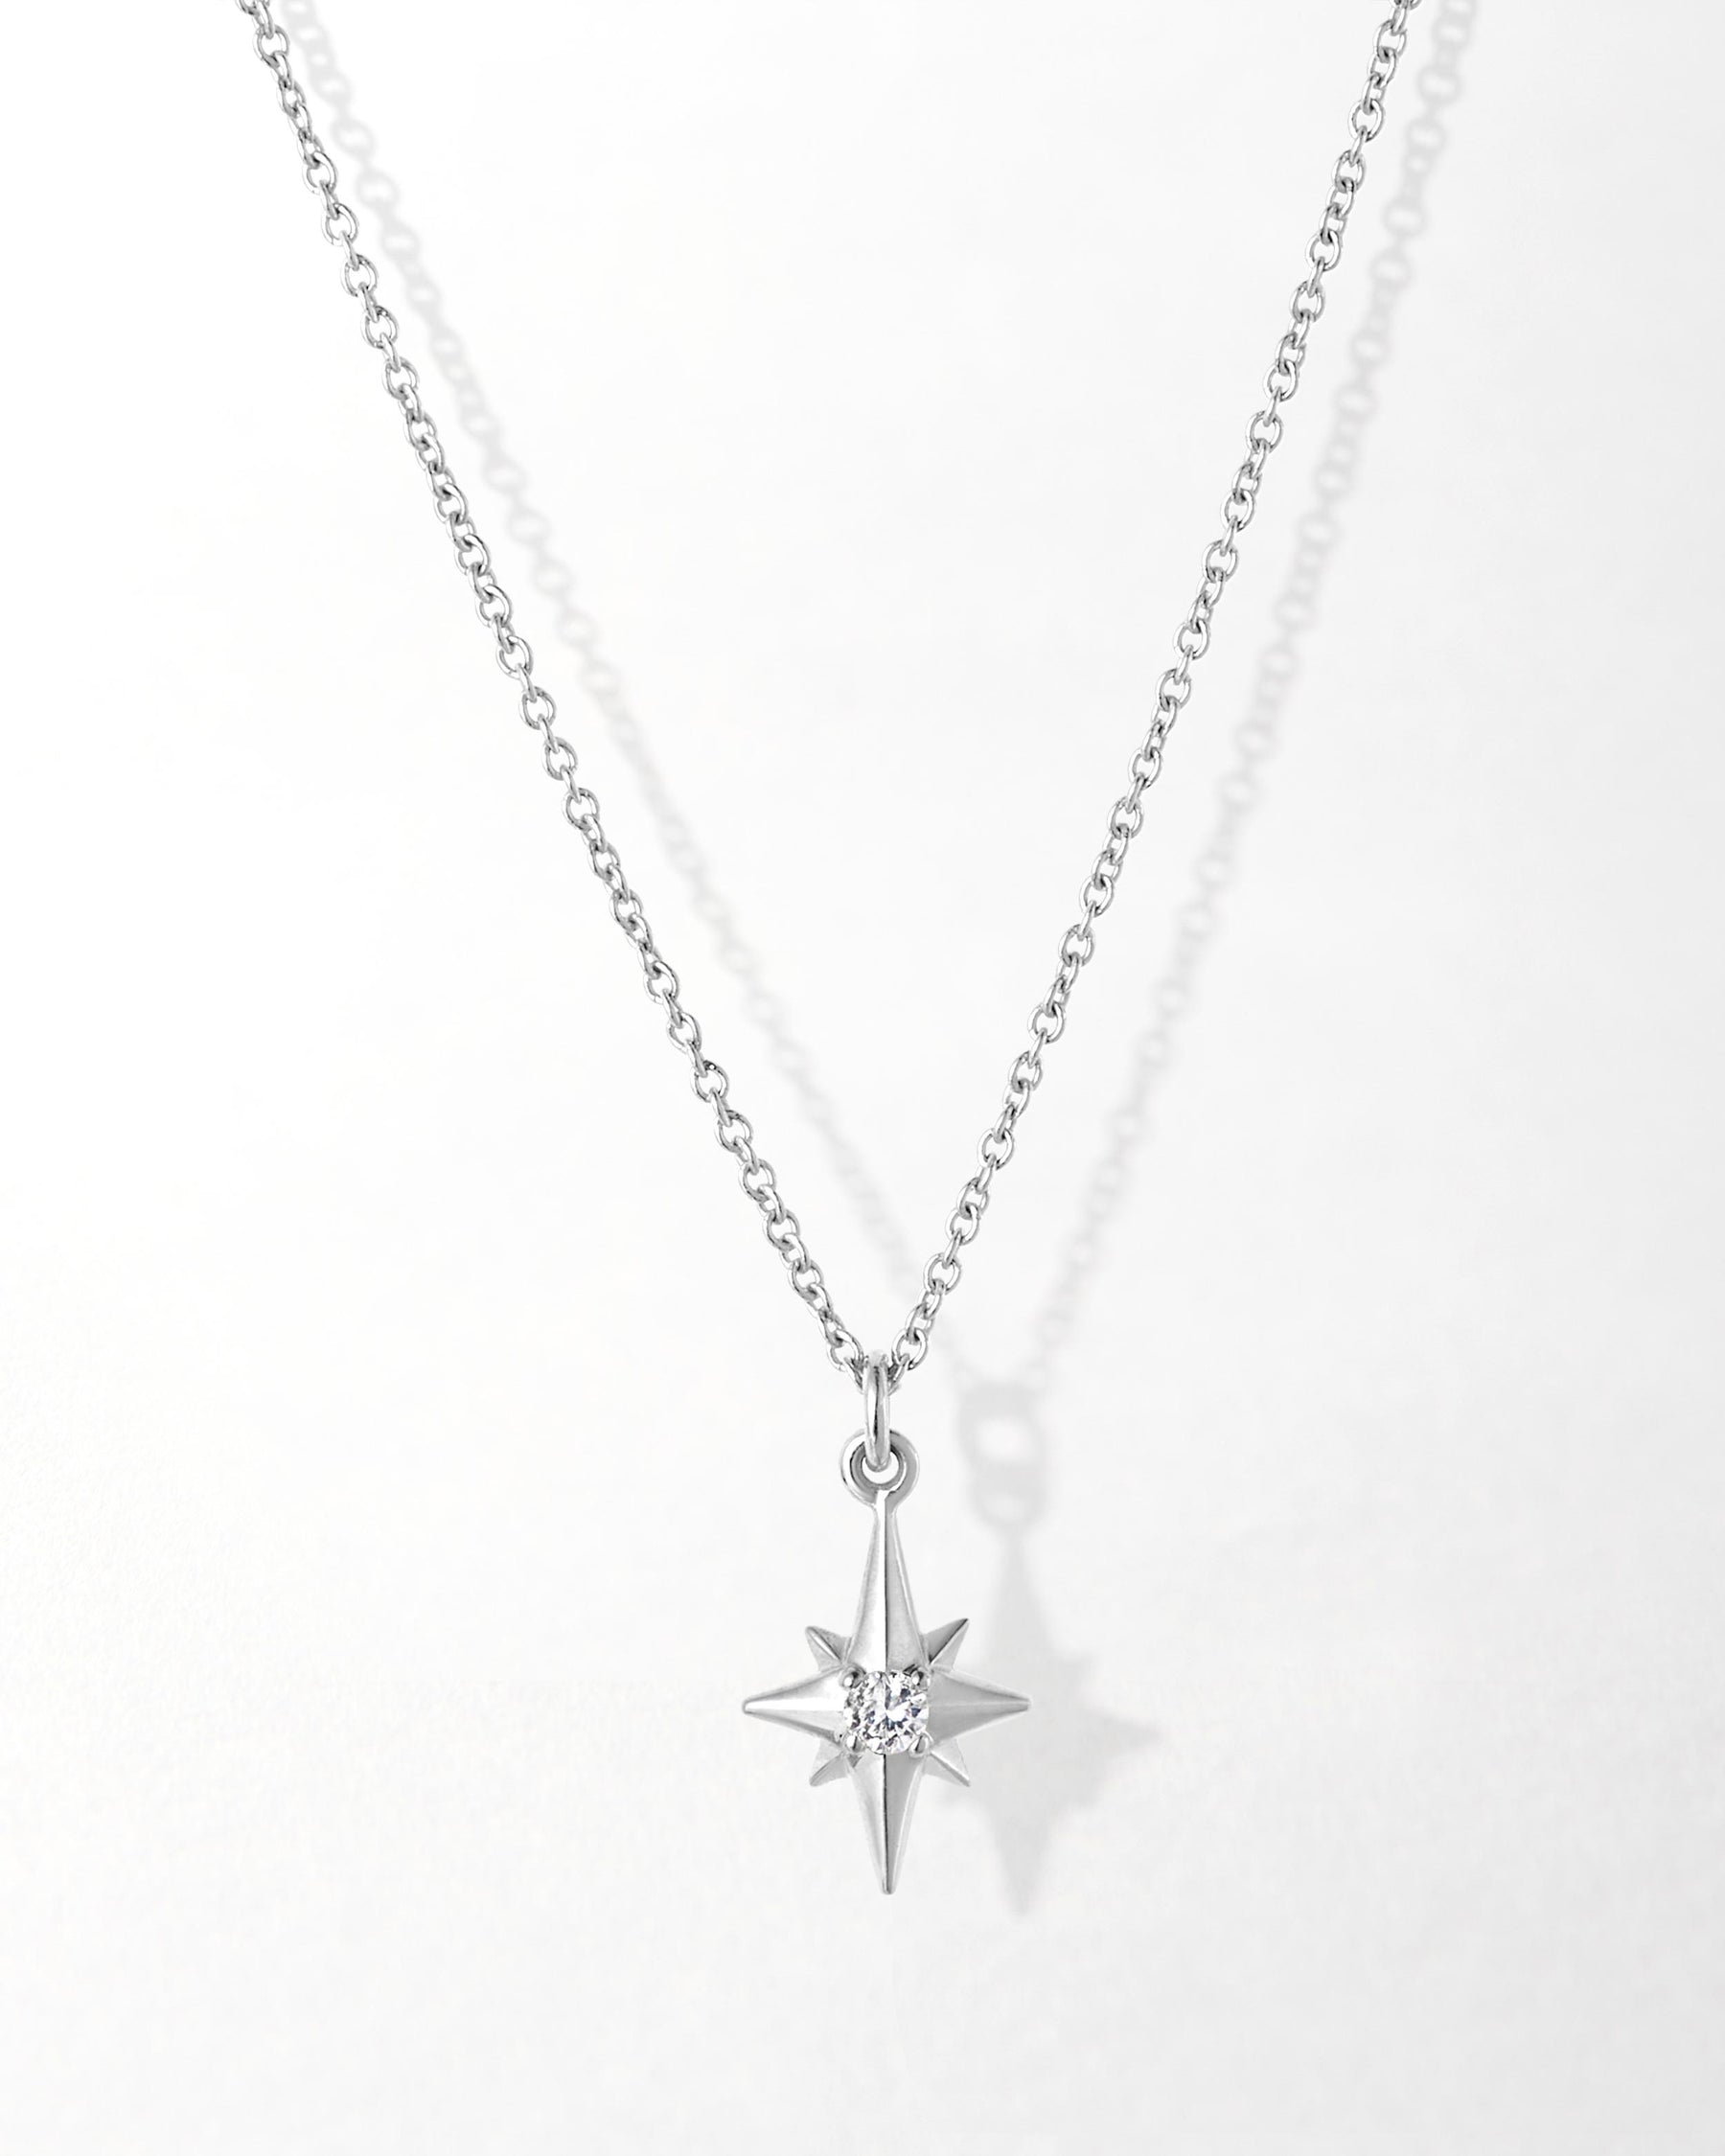 chanel star pendant necklace